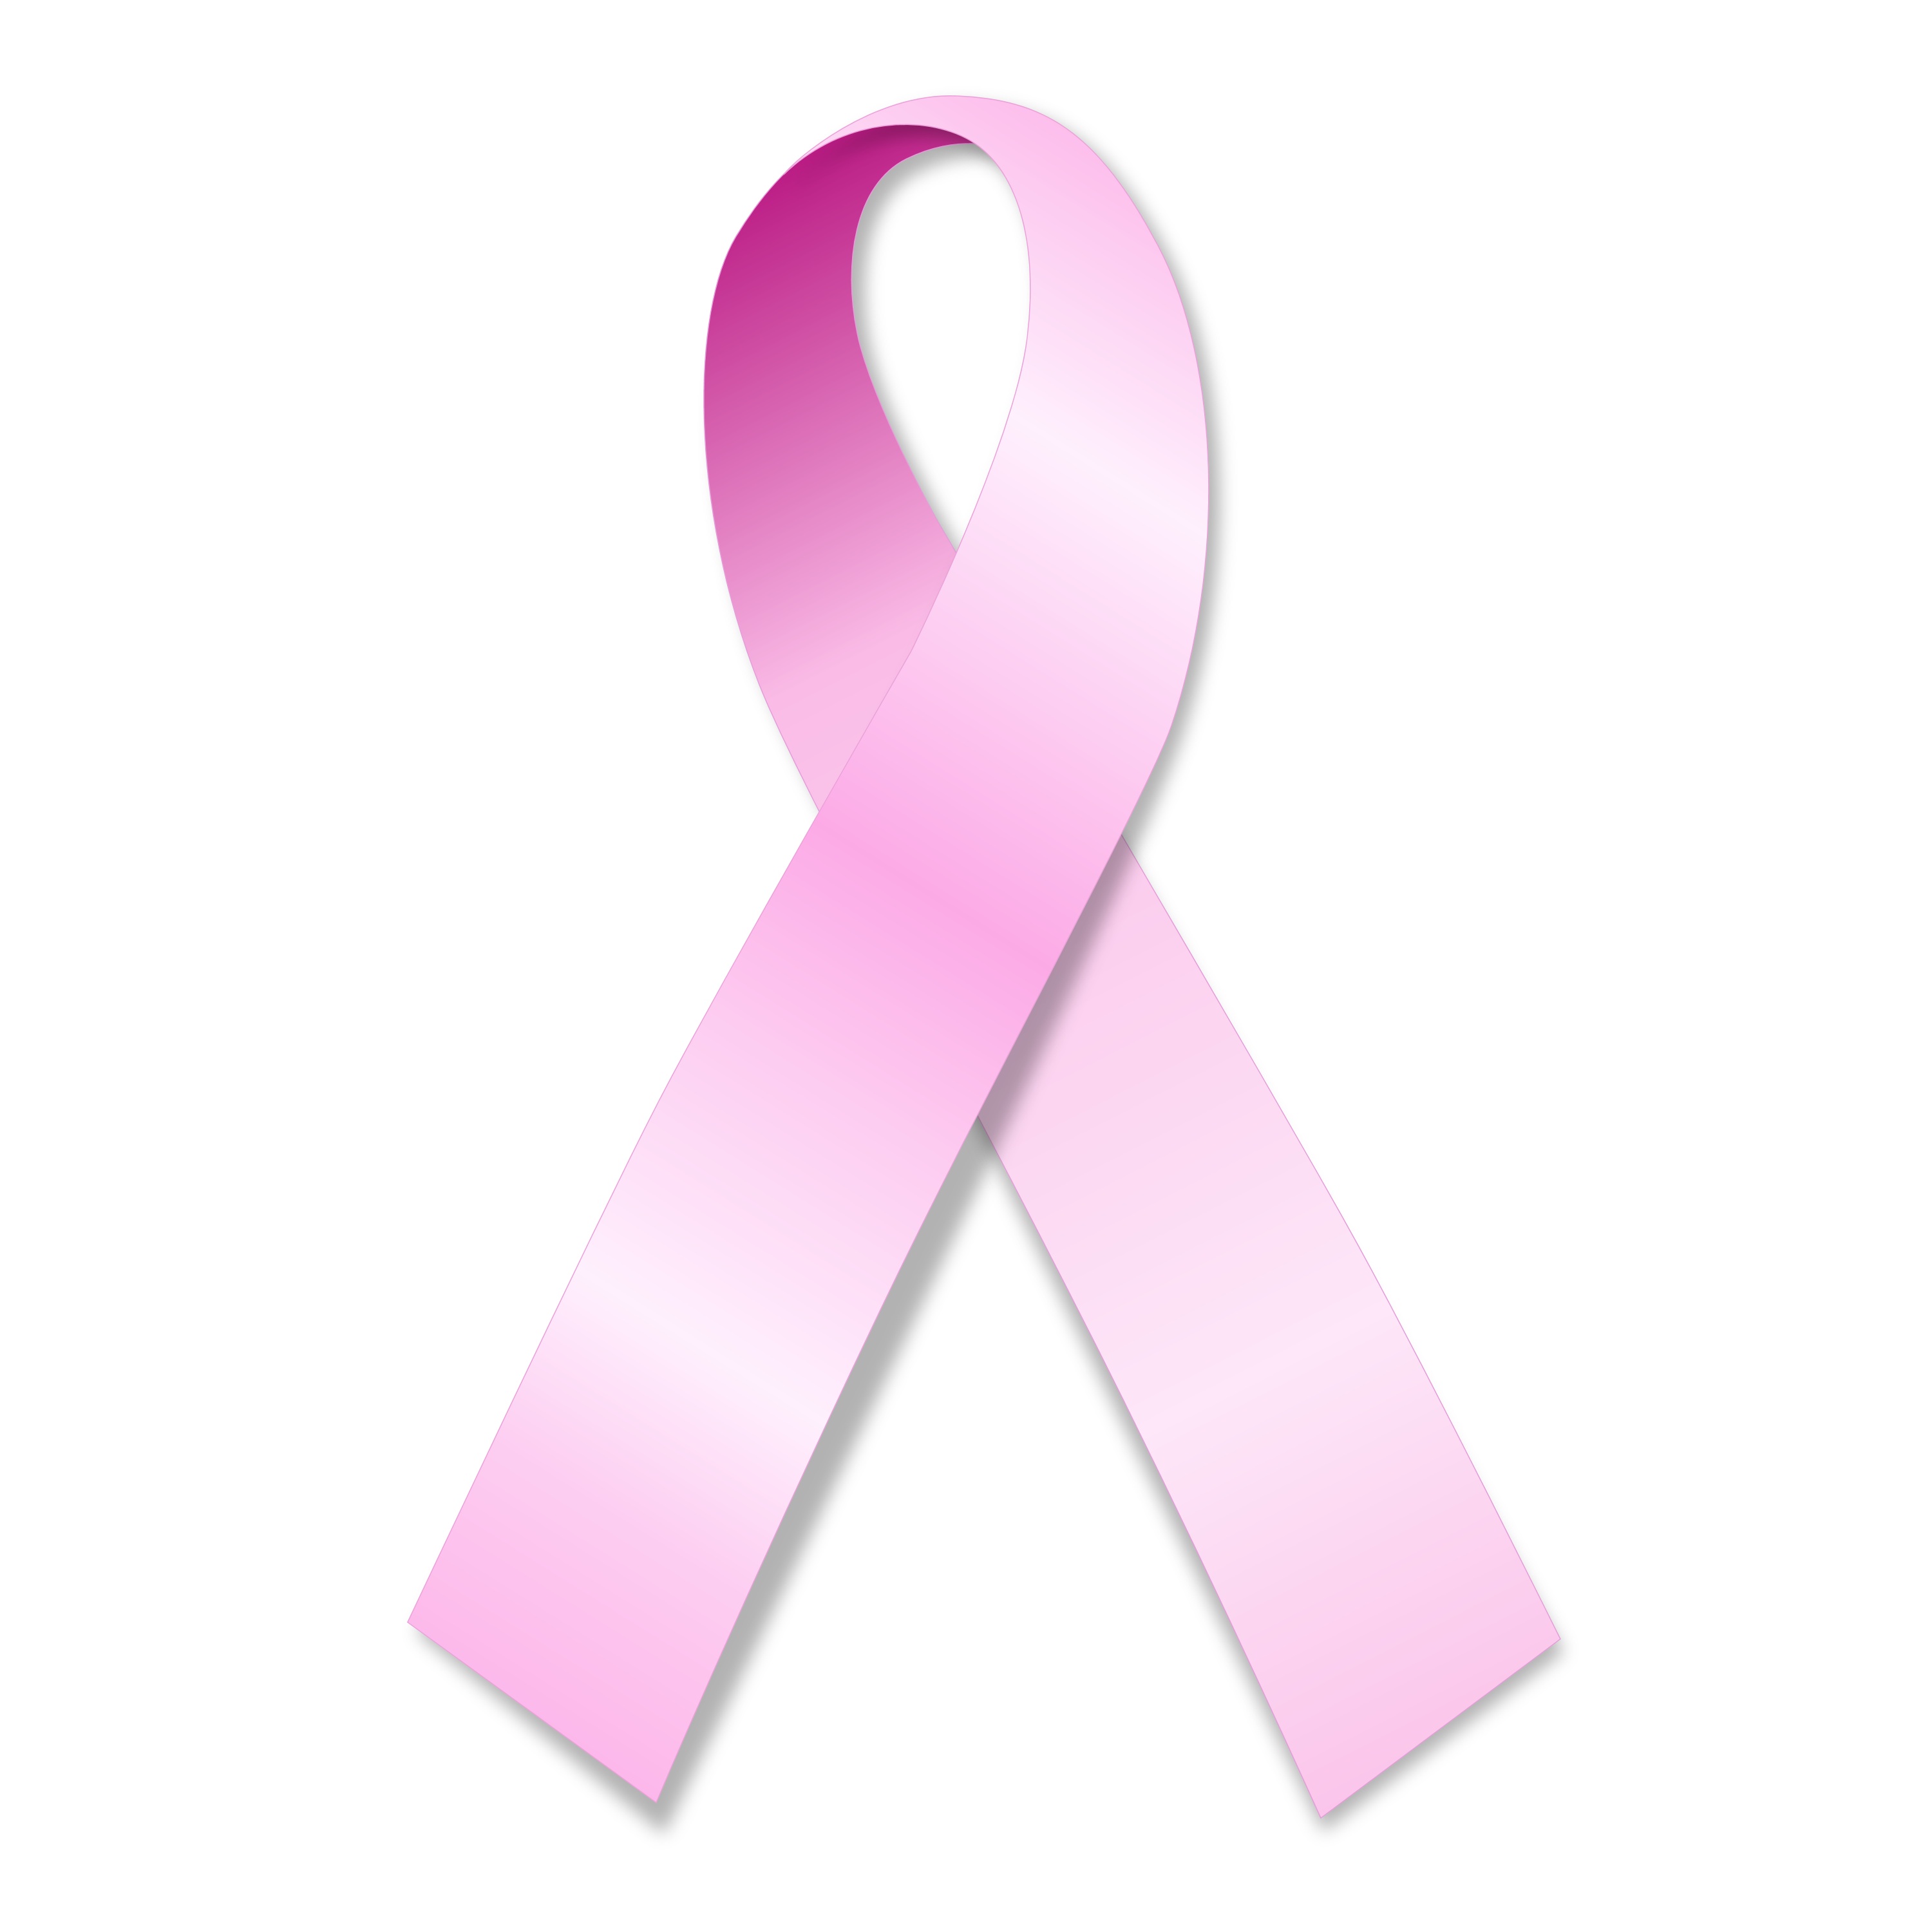 Pink Cancer Ribbon Vector - Gallery